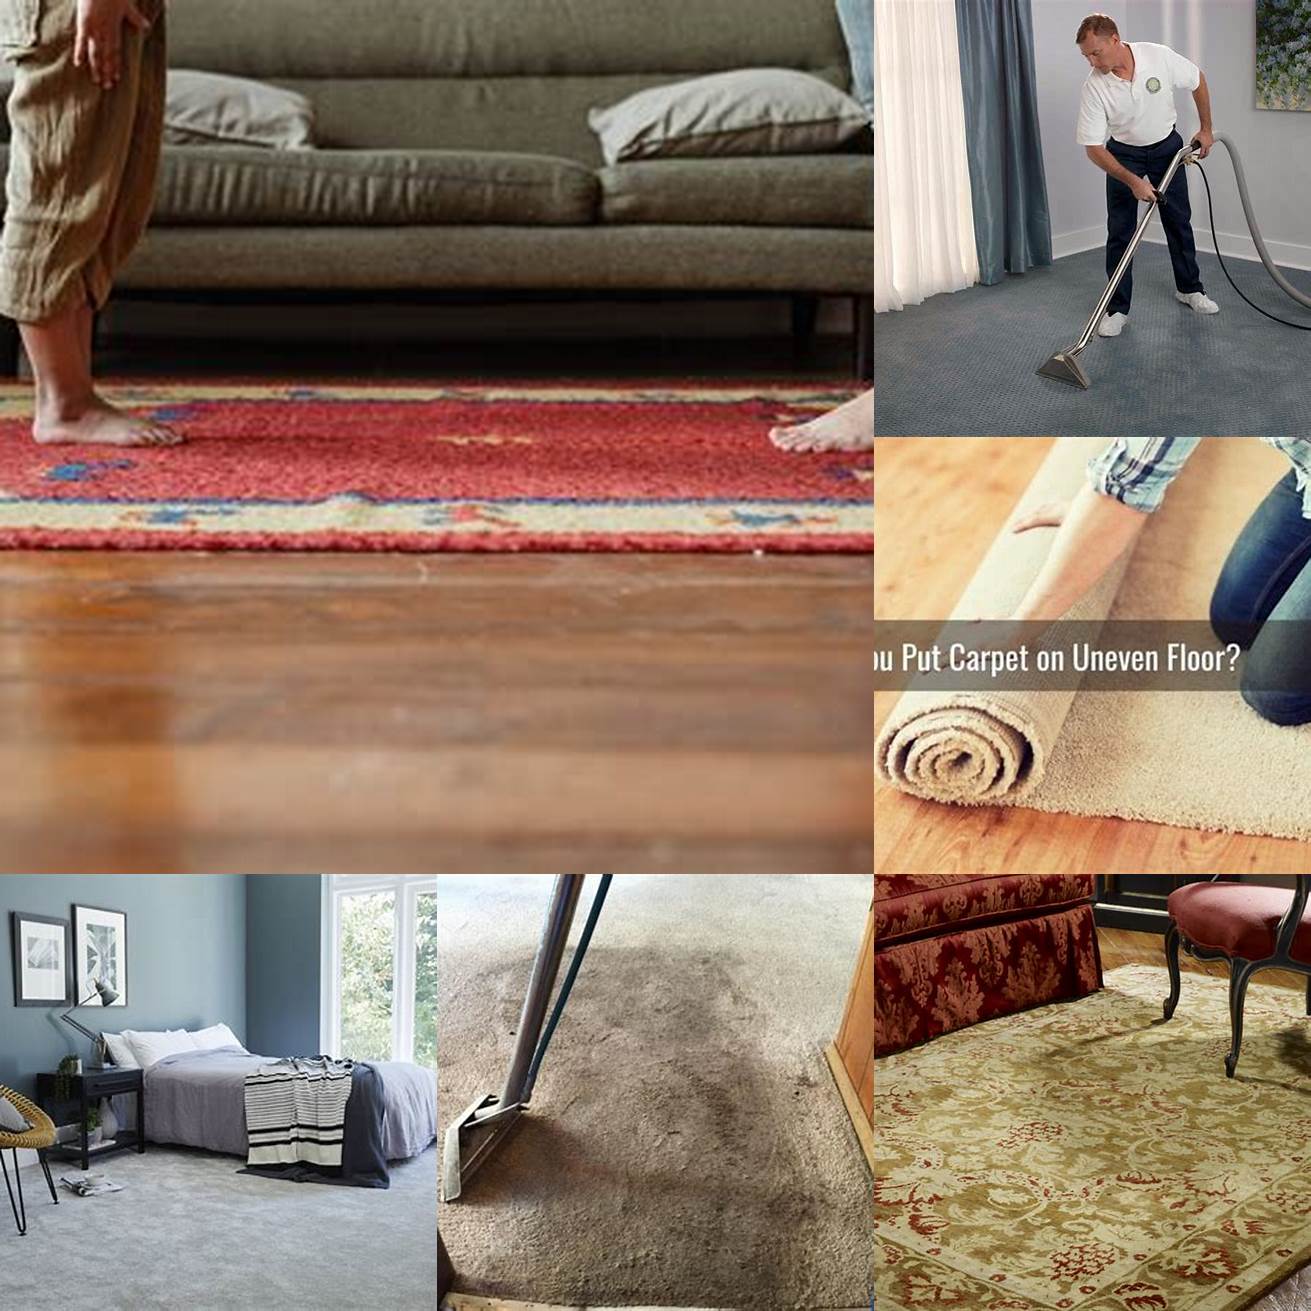 Rotate your rug regularly to prevent uneven wear